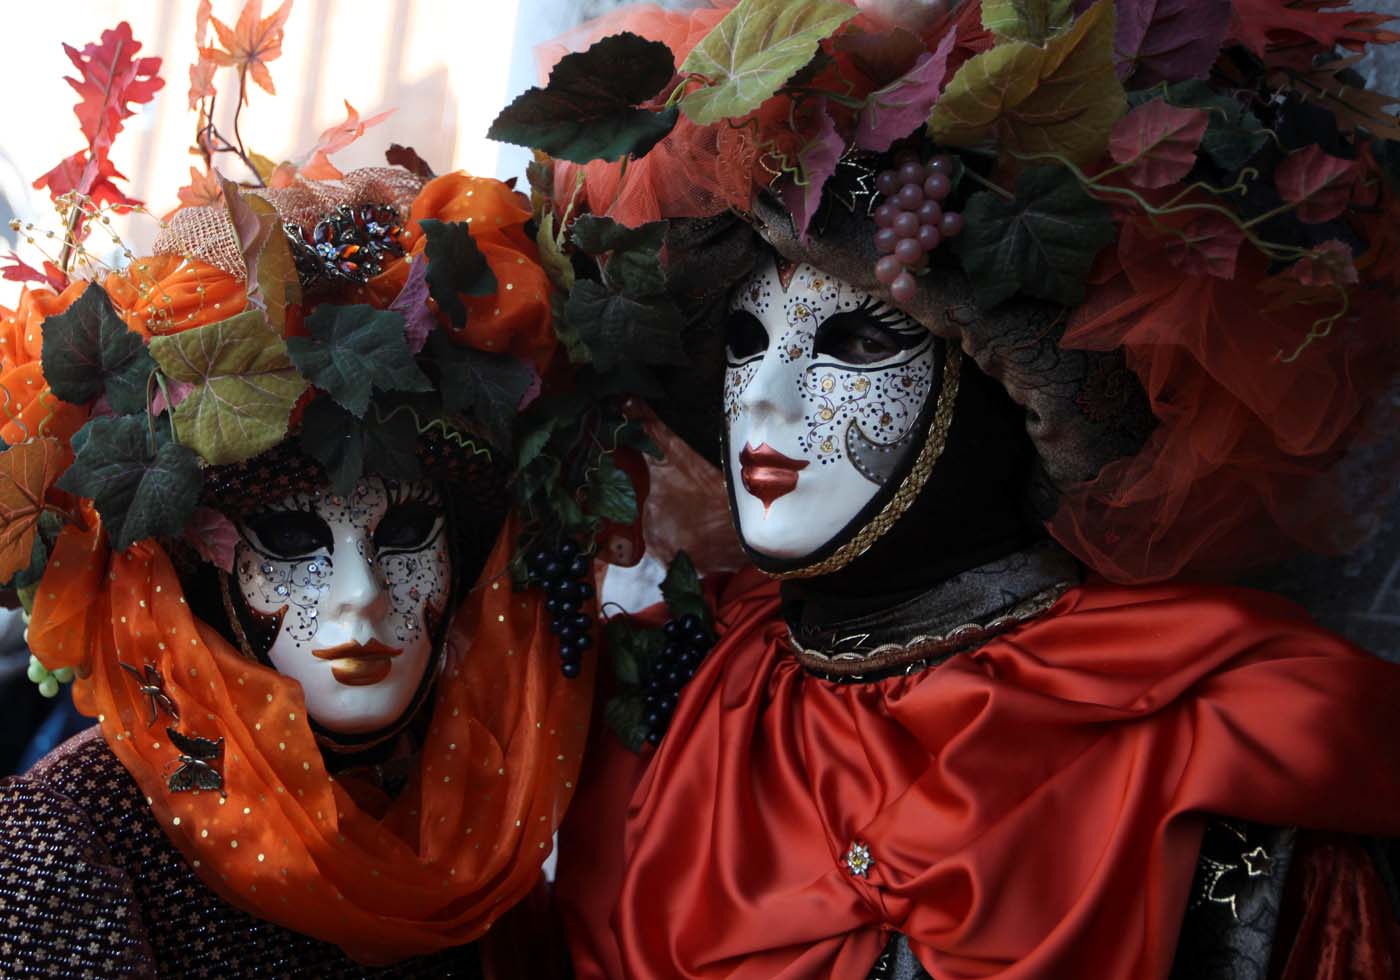 Masked revellers pose during the Carnival in Venice, Italy February 18, 2017. REUTERS/Fabrizio Bensch